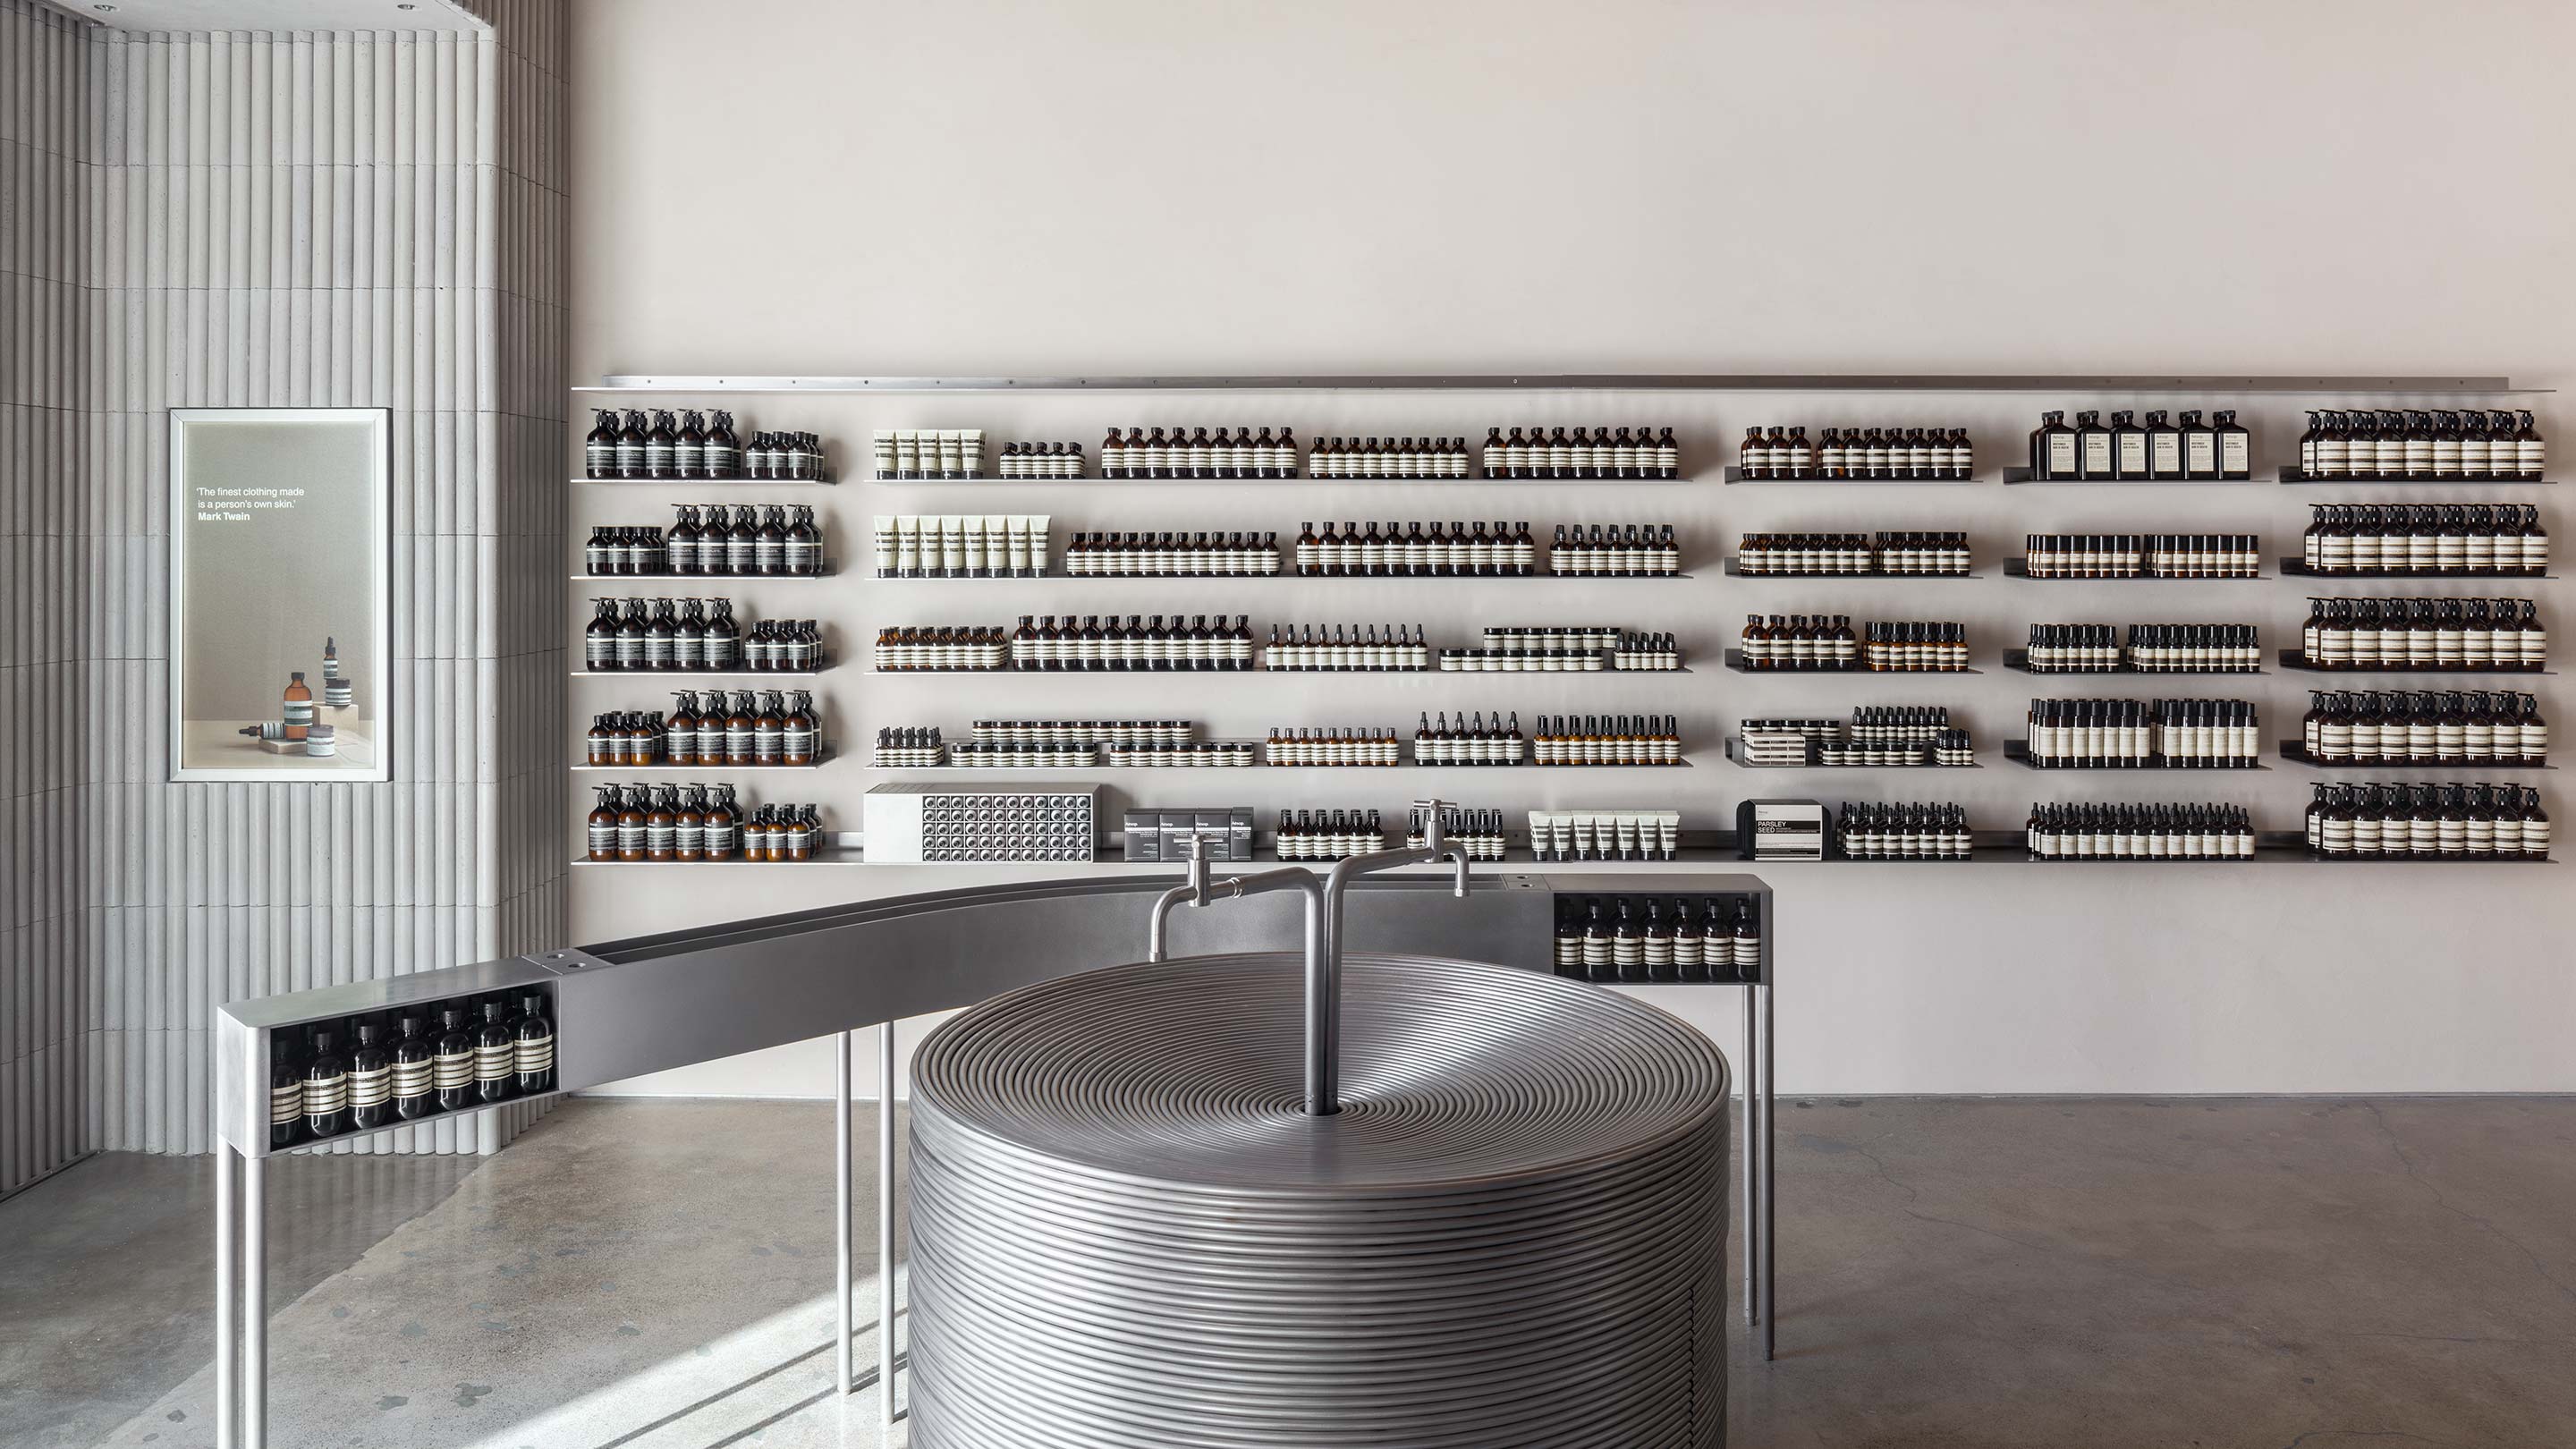 A circular sink made of brushed steel sits in the foreground; Aesop products arranged on shelves in the background.